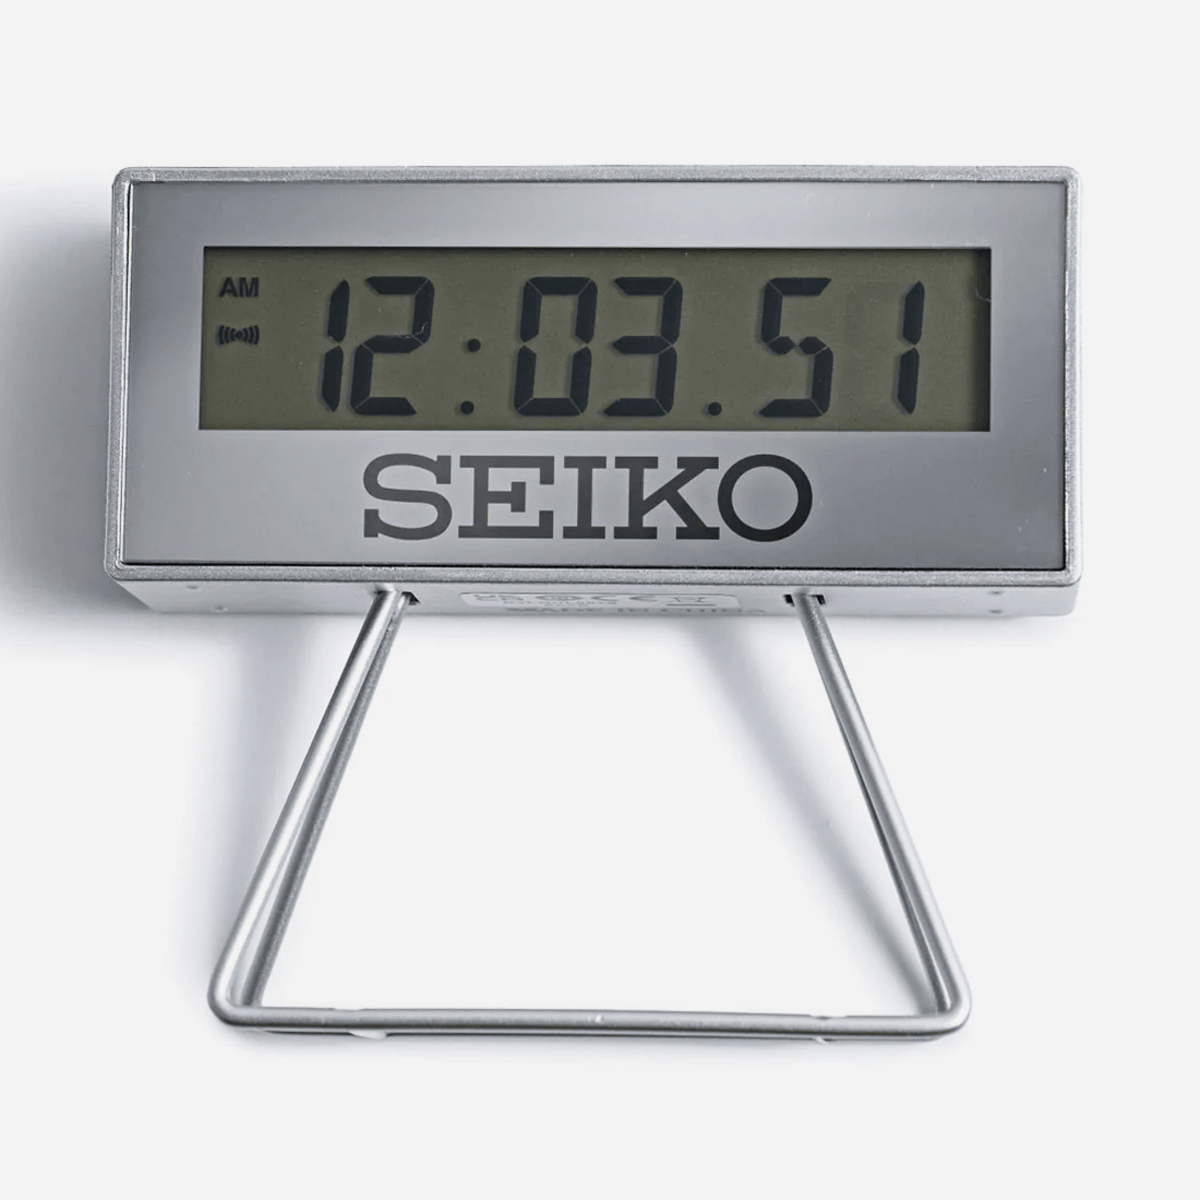 Seiko Goes Retro With the New Olympia Desk Clock - Airows